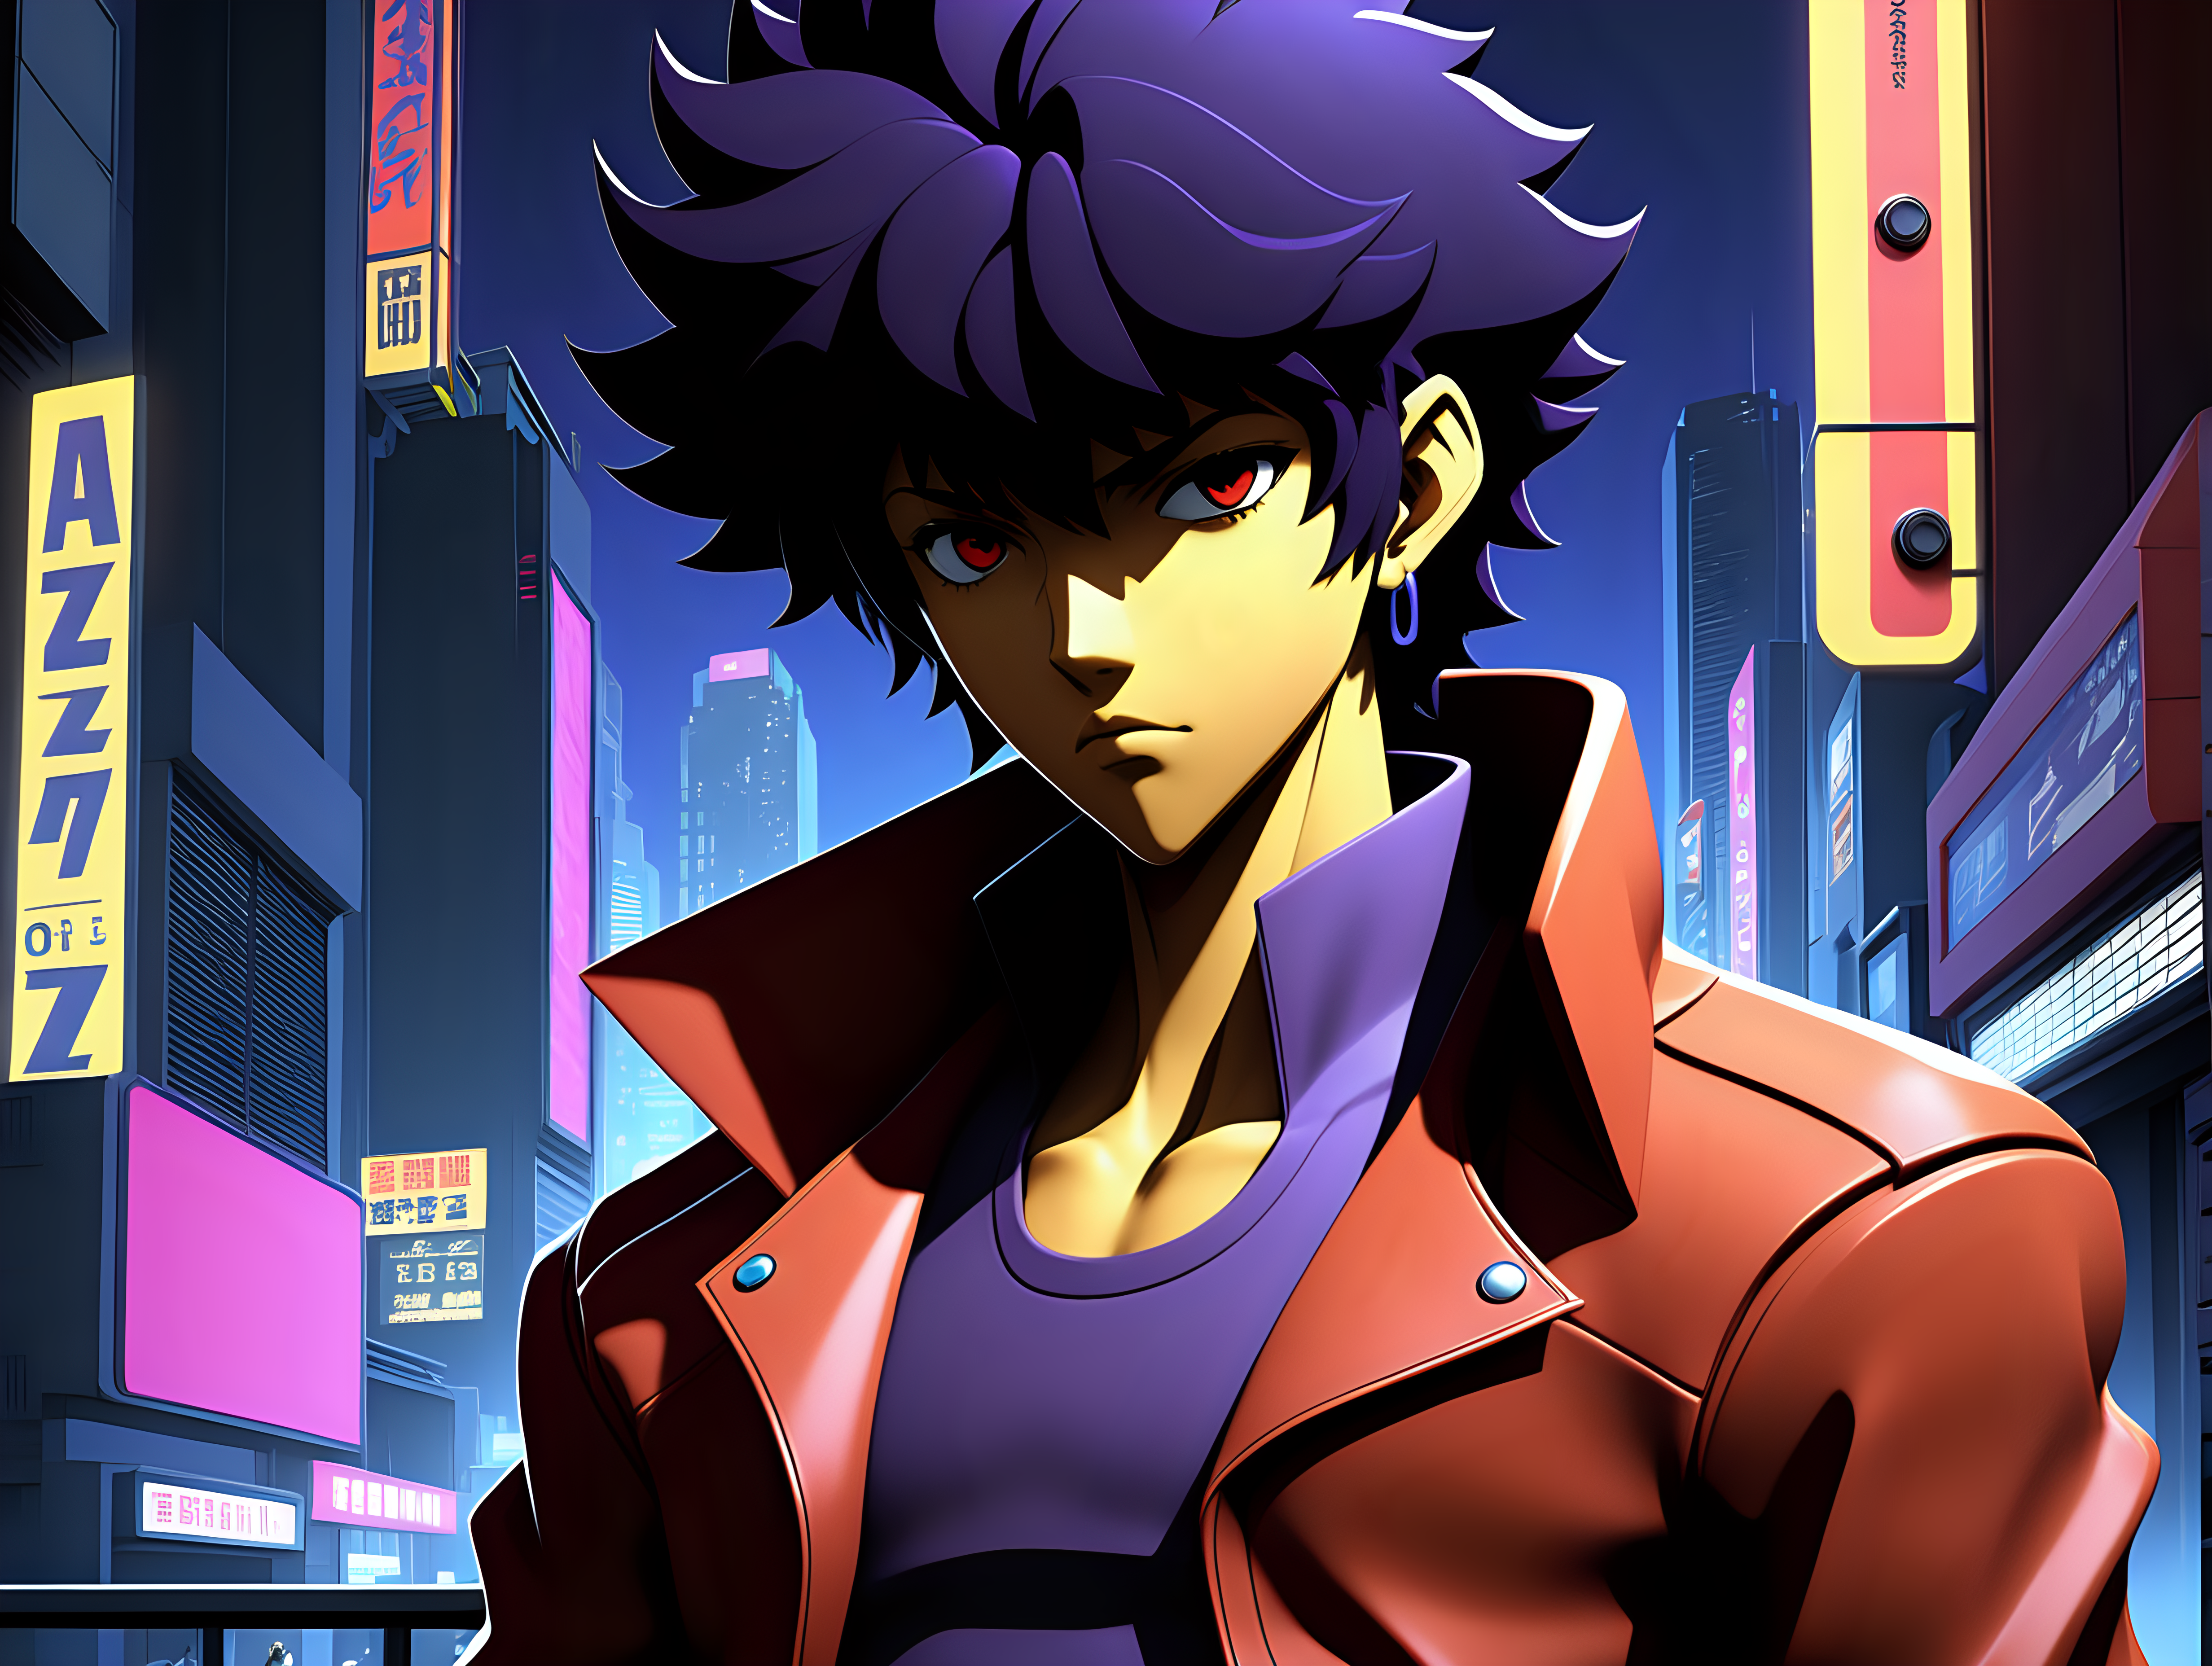 Generate concept art for a JRPG with a jazz-infused soundtrack and an aesthetic inspired by Persona, Cowboy Bebop, and Akira. The scene should showcase the main characters in a vibrant urban environment, specifically in or around a futuristic bar or nightclub with elements of futuristic technology and a touch of noir.

Incorporate smooth low-poly graphics reminiscent of the PS1 era, capturing the essence of classic JRPGs. The art style should draw inspiration from the stylish and dynamic visuals of Persona, the gritty cyberpunk atmosphere of Akira, and the jazzy, adventurous feel of Cowboy Bebop. Set the scene in a bustling city with neon lights, futuristic architecture, and a jazz club or district.

Highlight the main characters in a way that reflects their personalities and the overall tone of the game. The soundtrack should evoke the soulful and improvisational spirit of jazz, setting the mood for the JRPG adventure.

Embrace the fusion of futuristic technology, jazz influences, and the captivating aesthetics of Persona, Cowboy Bebop, and Akira, delivering a visually stunning and immersive concept for a JRPG with a futuristic bar or nightclub background.